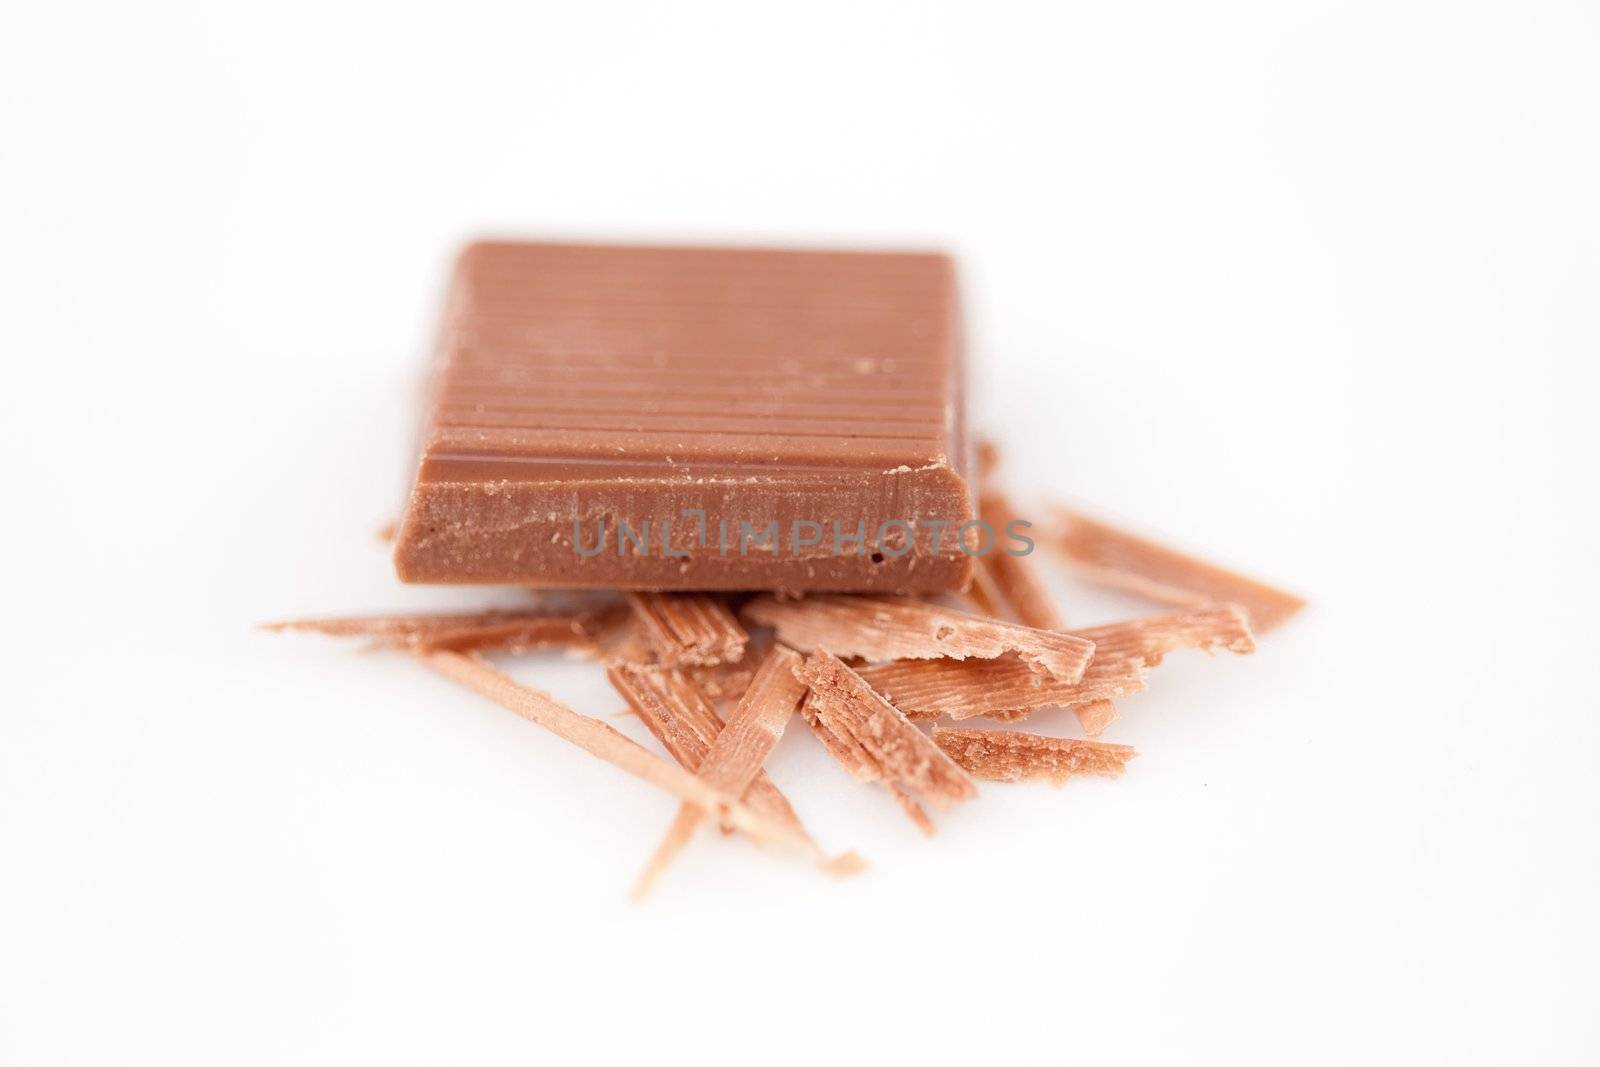 Close up of a piece of chocolate on chocolate shavings